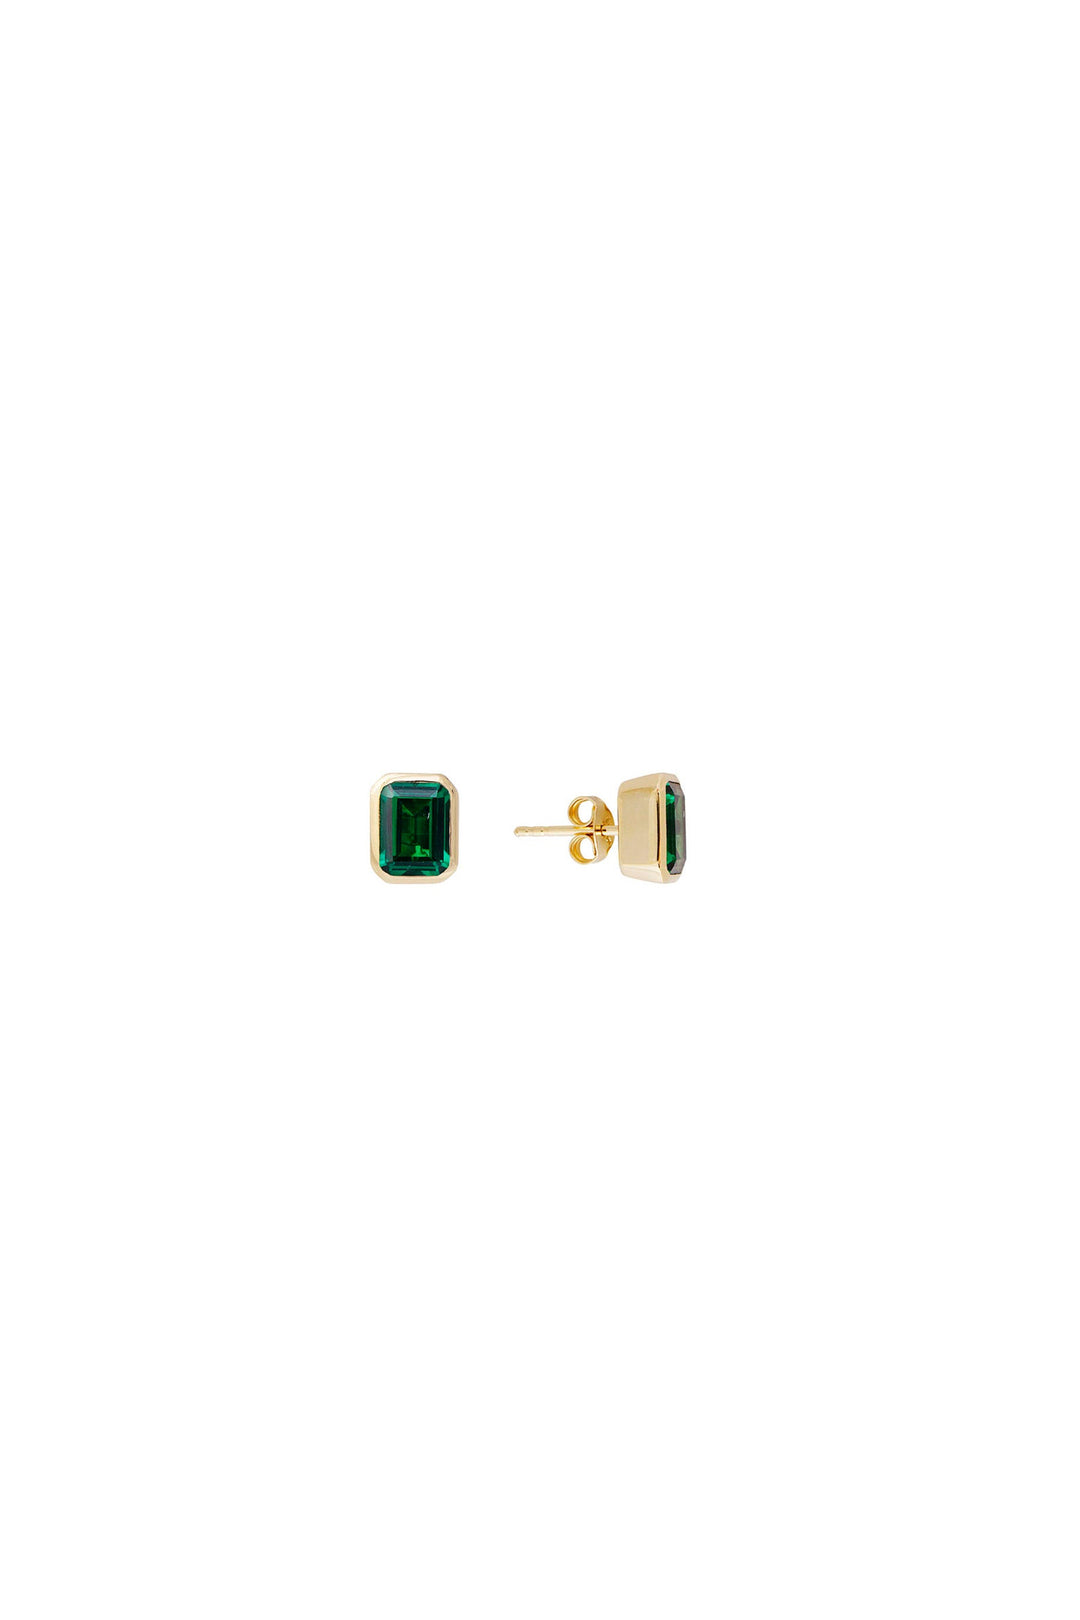 Fairley Cocktail Studs - Green